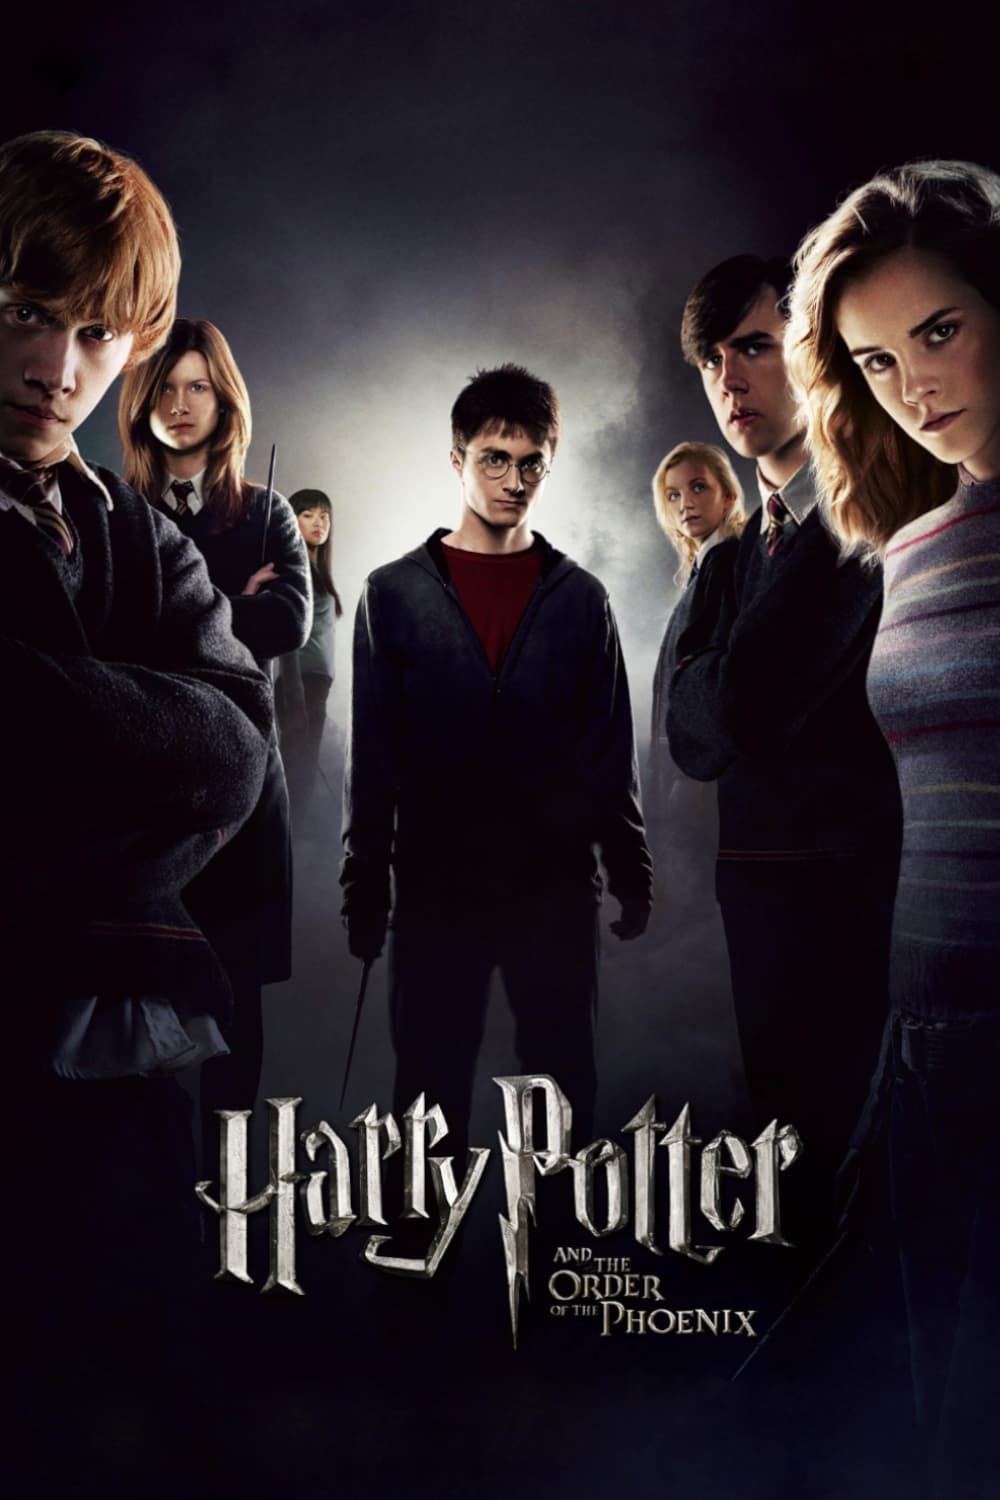 https://static.wikia.nocookie.net/international-entertainment-project/images/8/8d/Harry_Potter_and_the_Order_of_Phoenix_poster.jpg/revision/latest?cb=20221104135711